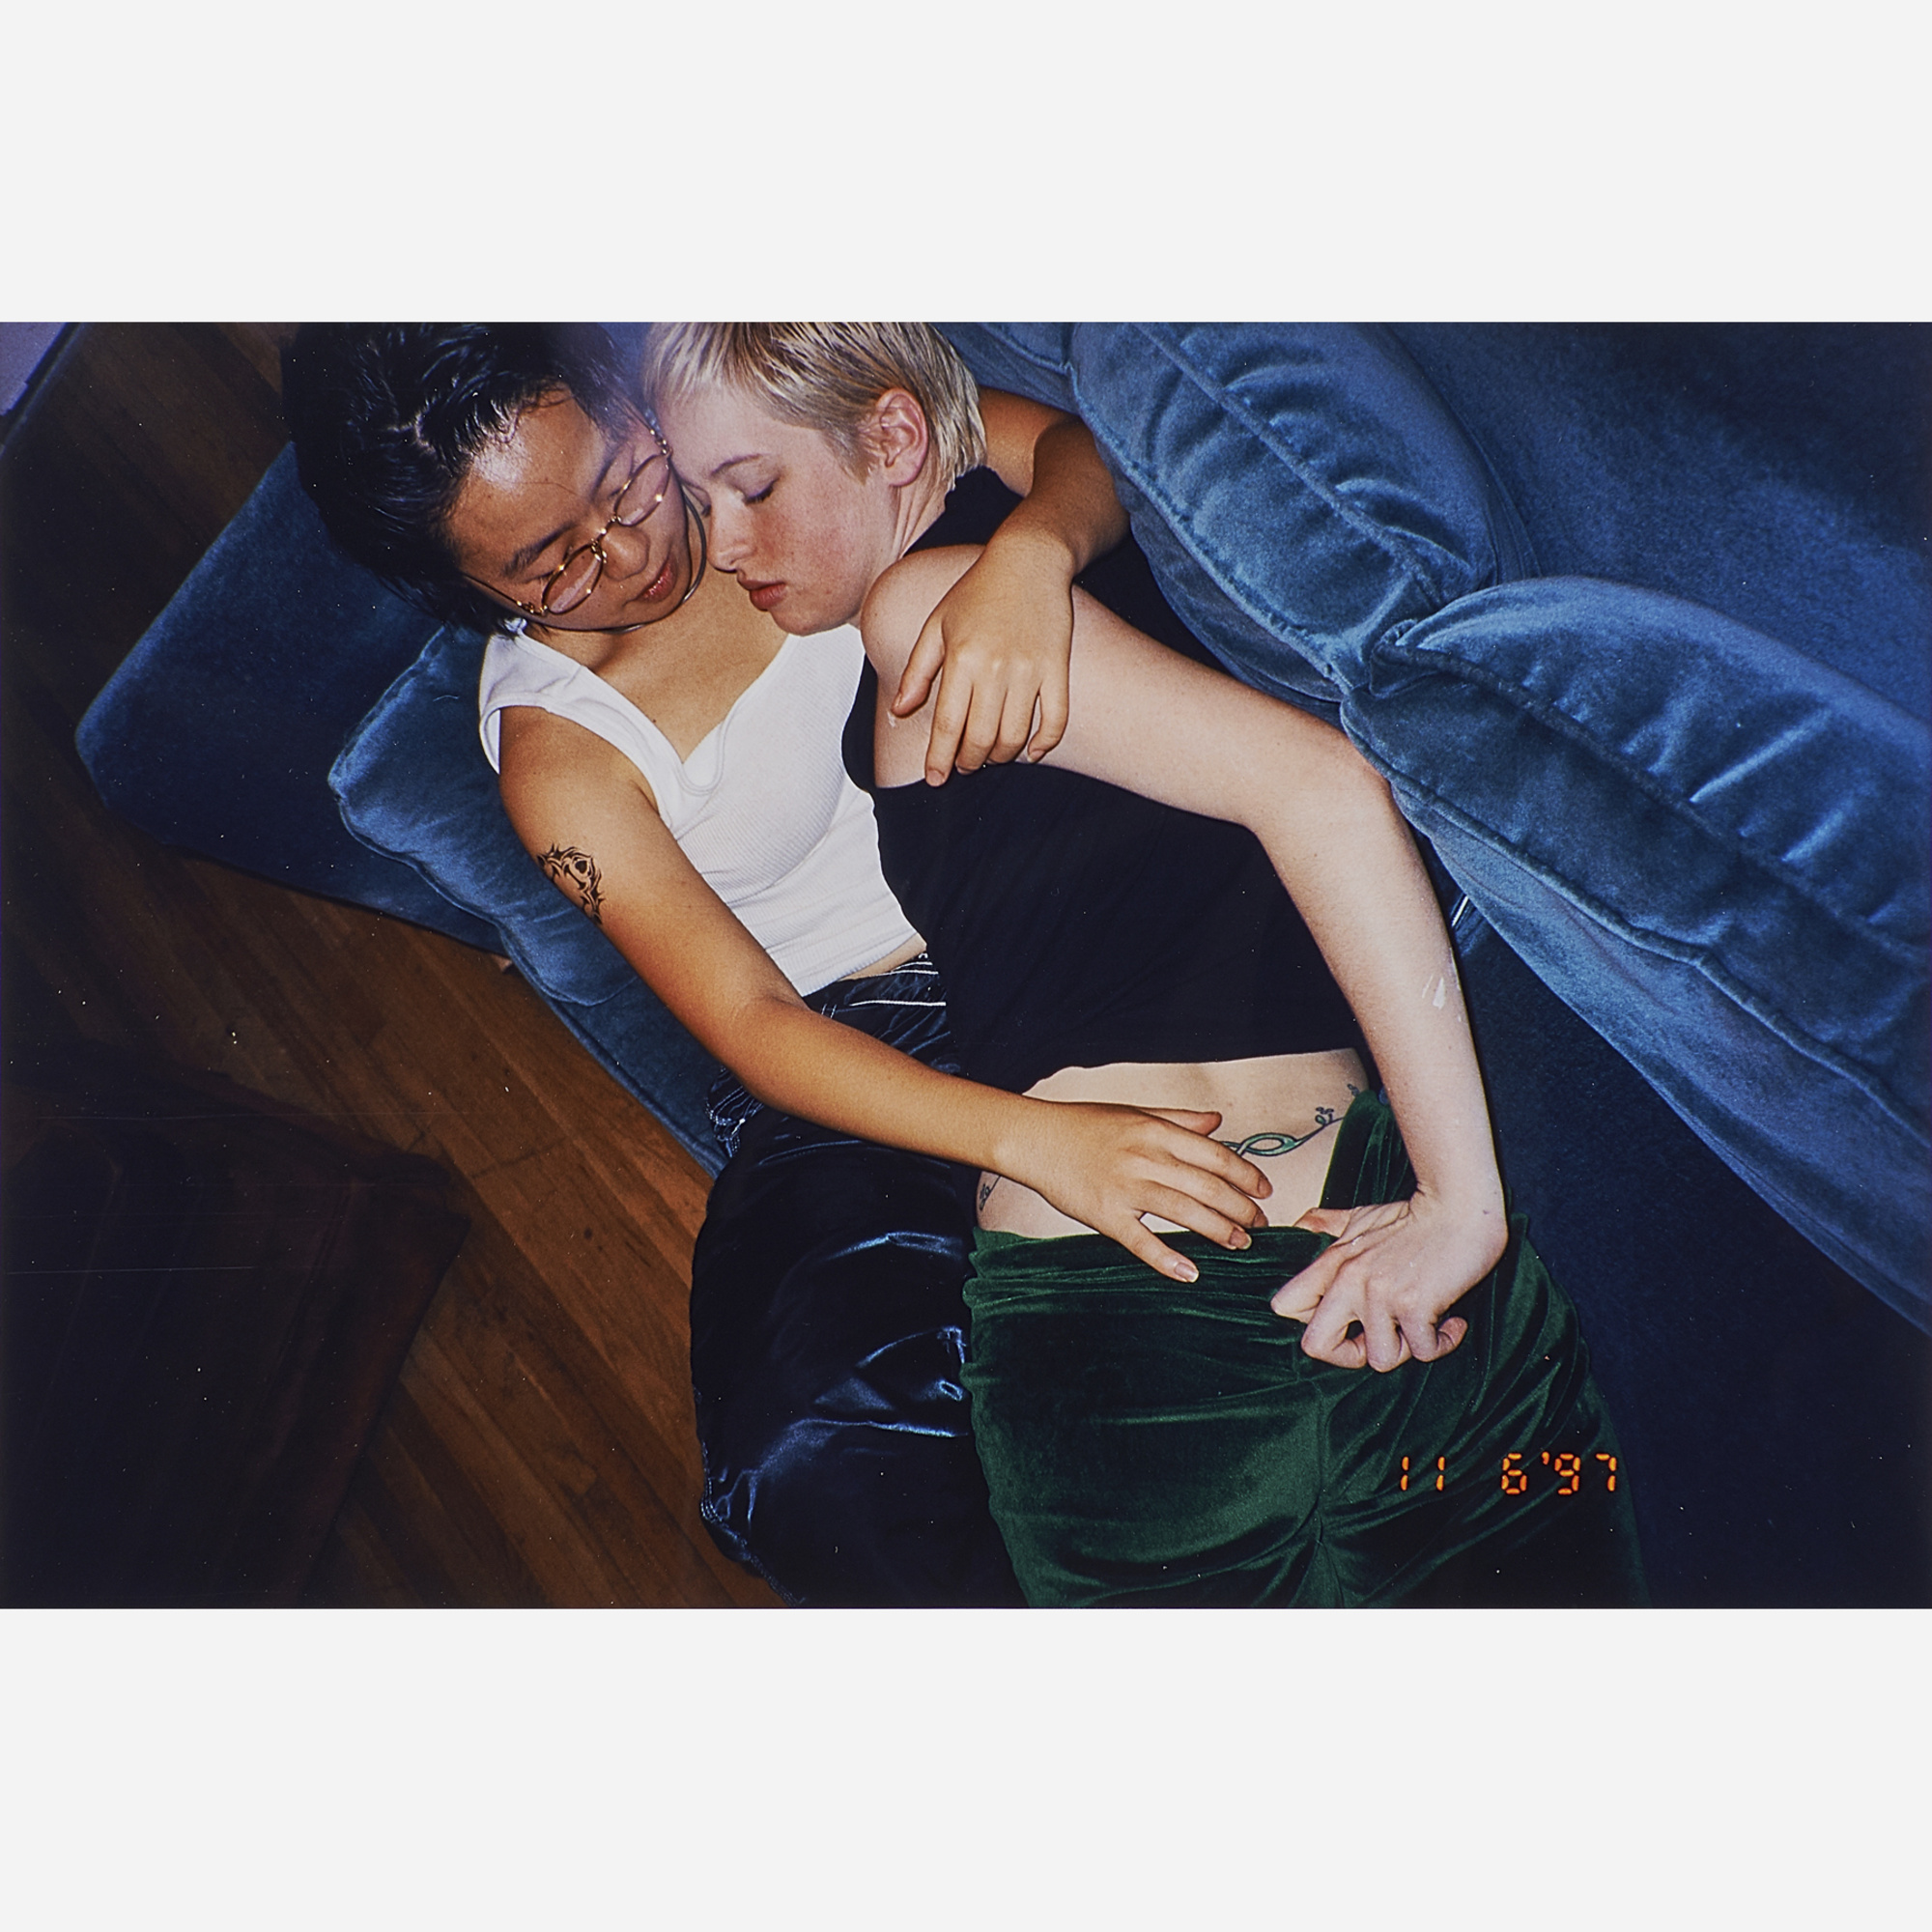 761: NIKKI S. LEE, The Lesbian project (15) < Post-War + Contemporary Art,  10 November 2018 < Auctions | Rago Auctions